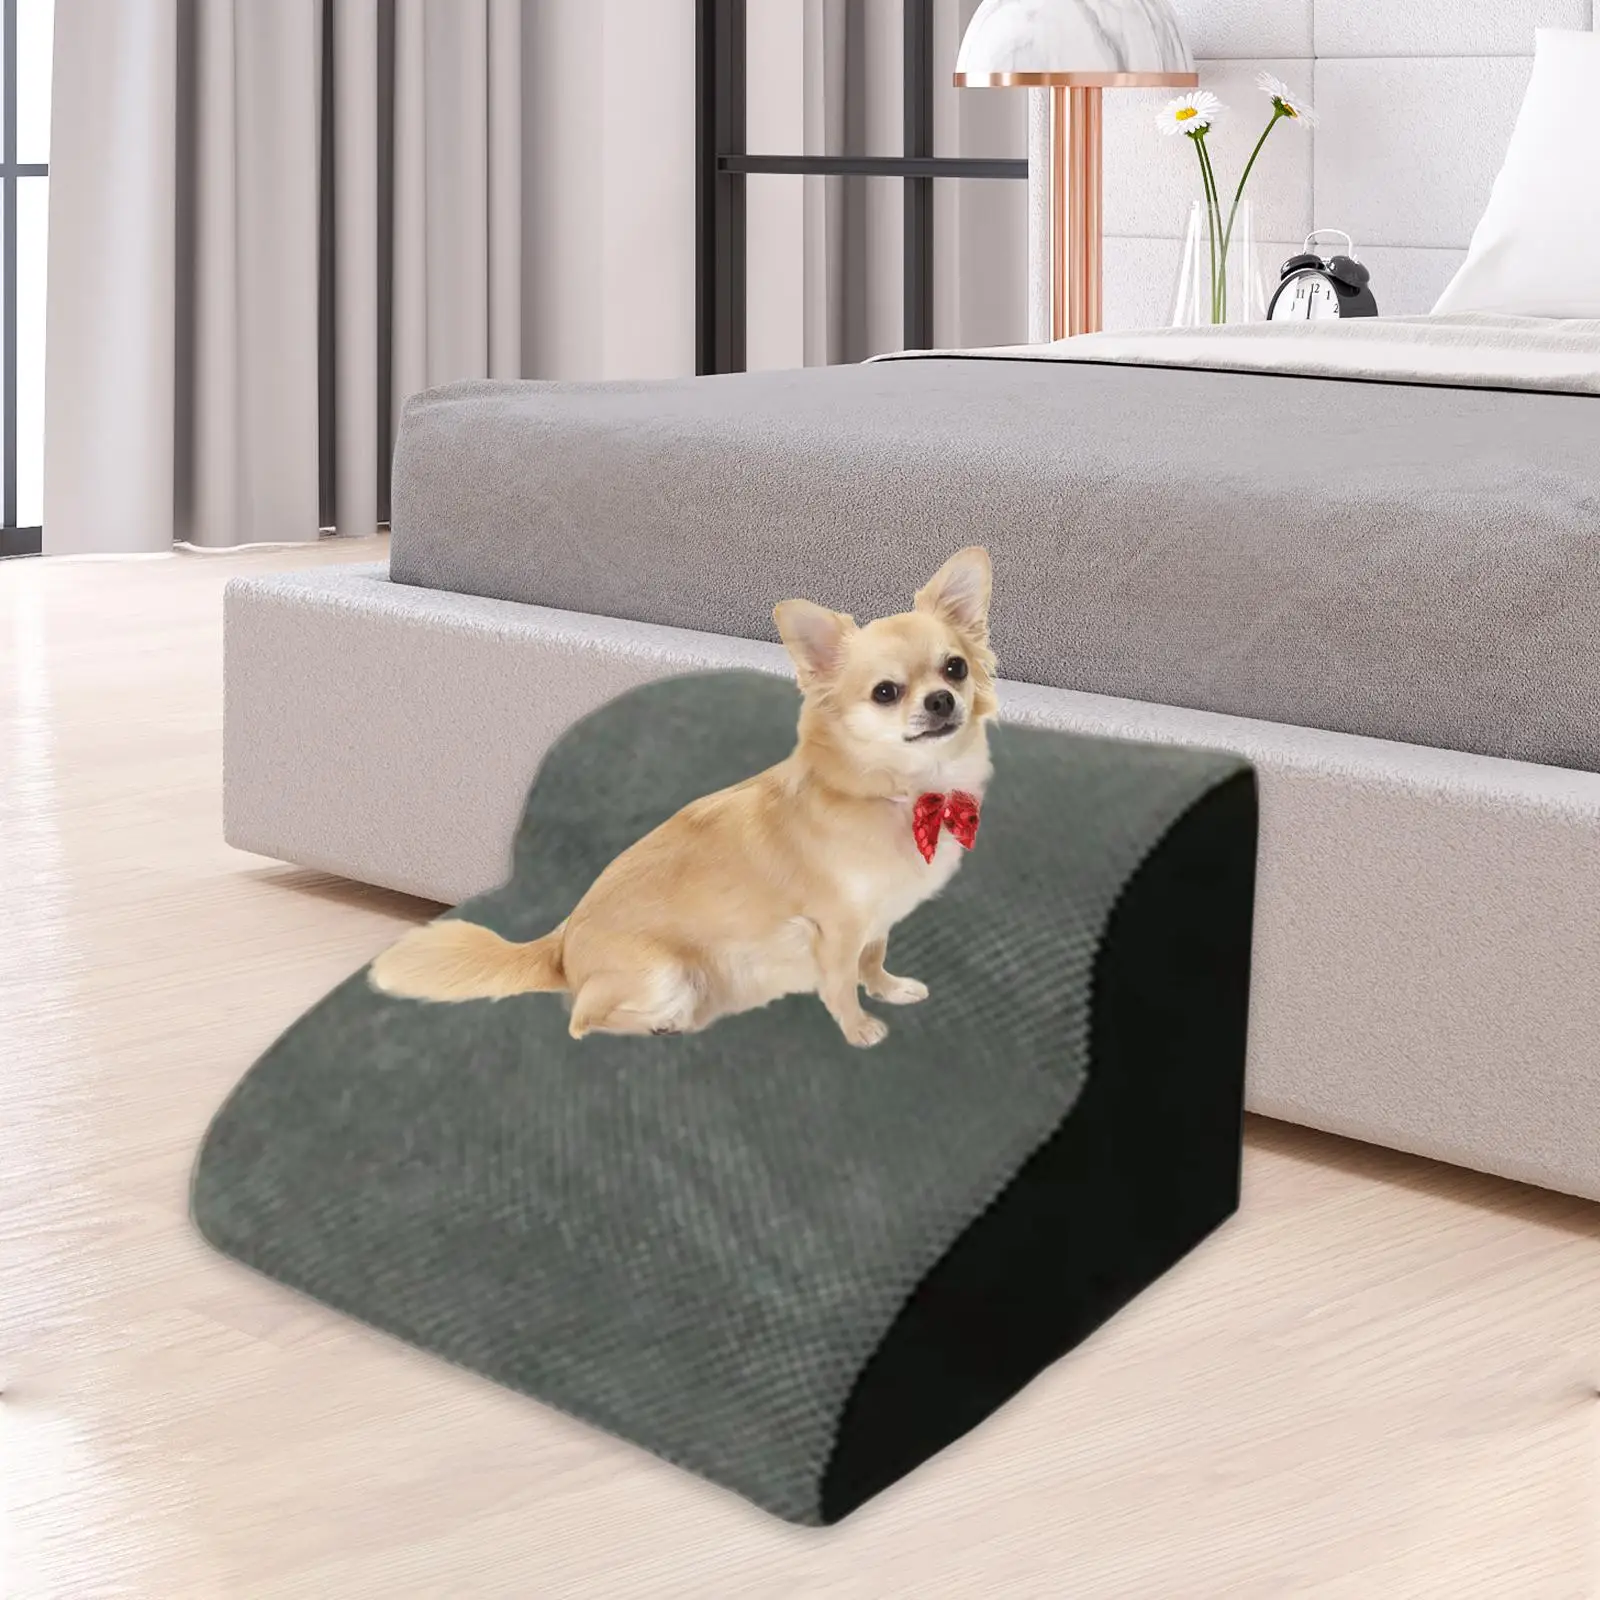 Dog Stairs Steps Pet Ladder Non Slip Platform Puppy Washable Cat Ramp for Car Couch Tall Bed Small Large Medium Dog Play